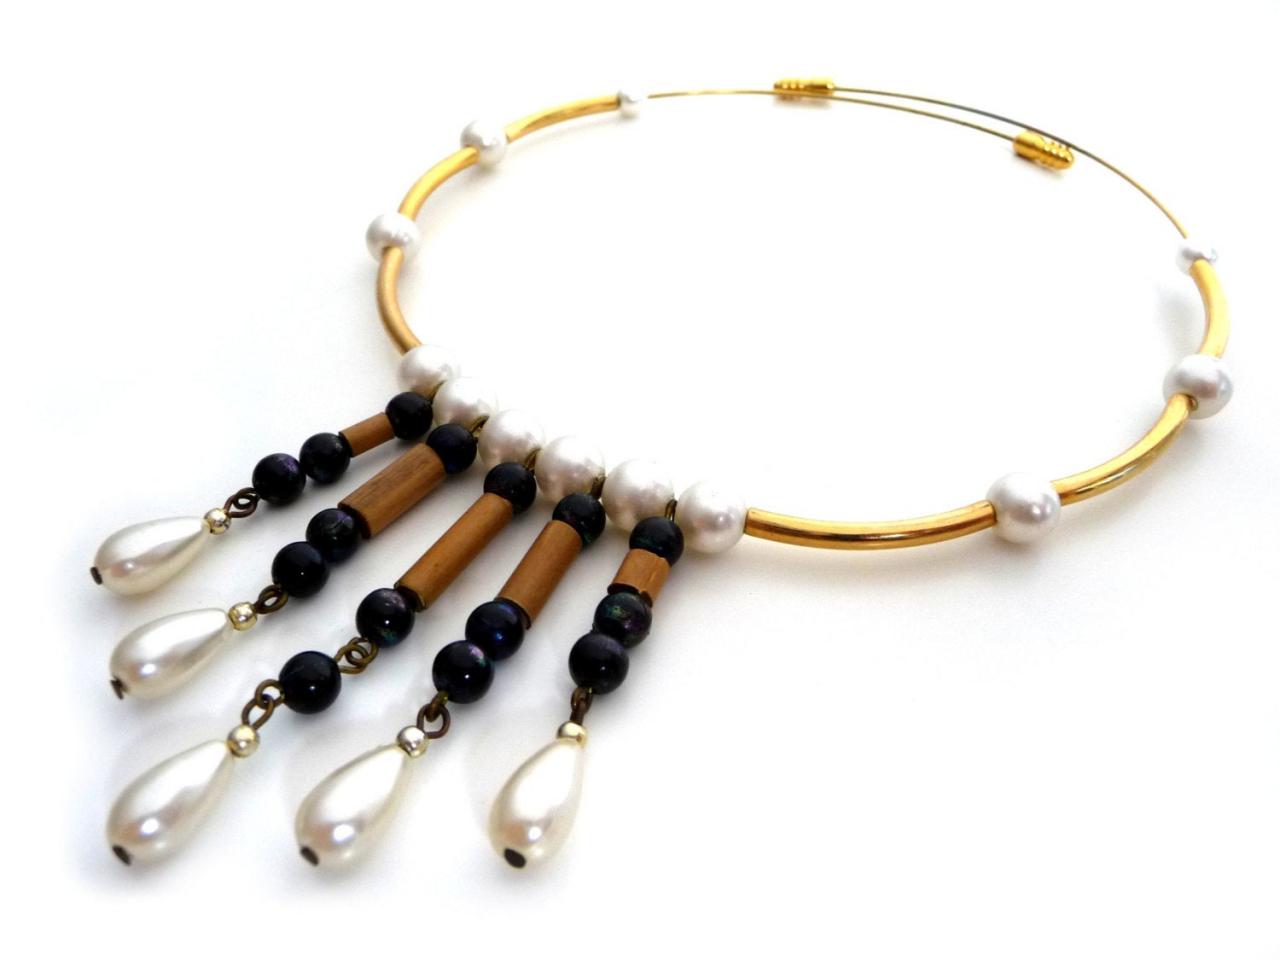 Gold Statement Garland Necklace - Gold Choker With Black Beads, Wood Sticks And White Pearl Drops